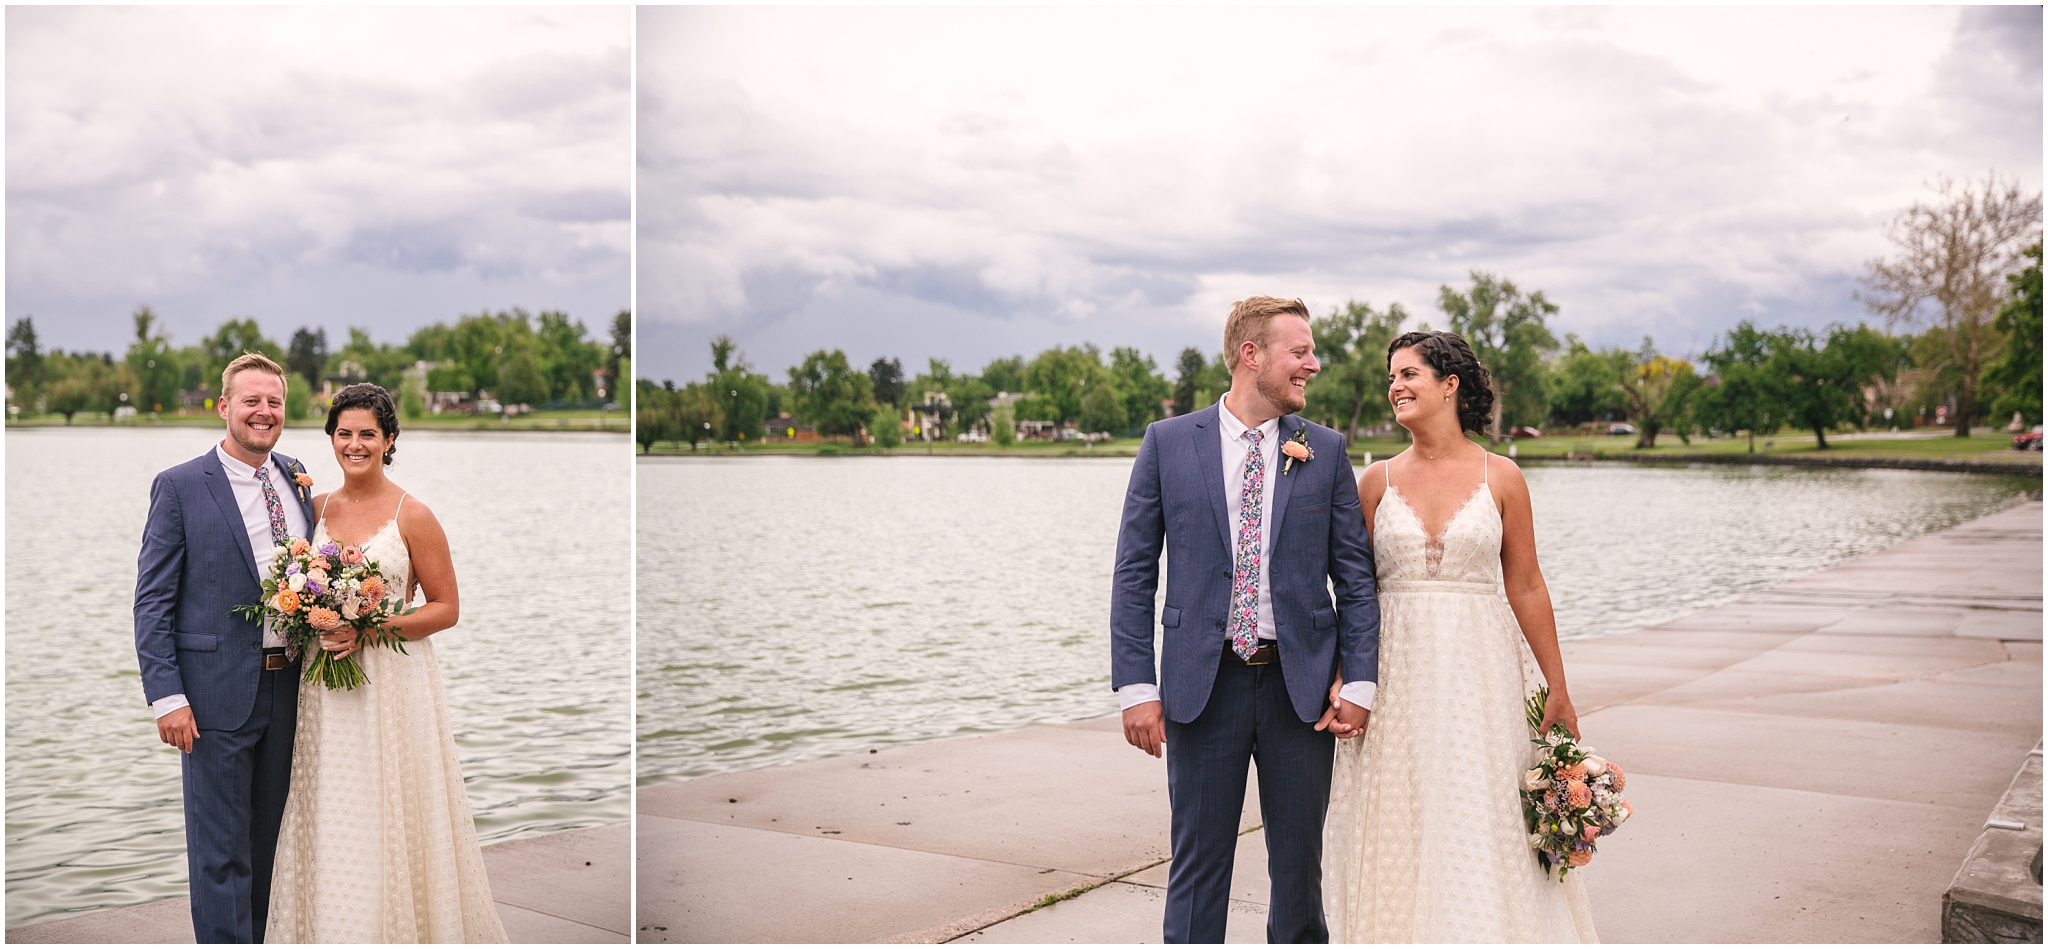 Bride and groom portraits at Smith Lake on a cloudy day in Washington Park in Denver Colorado